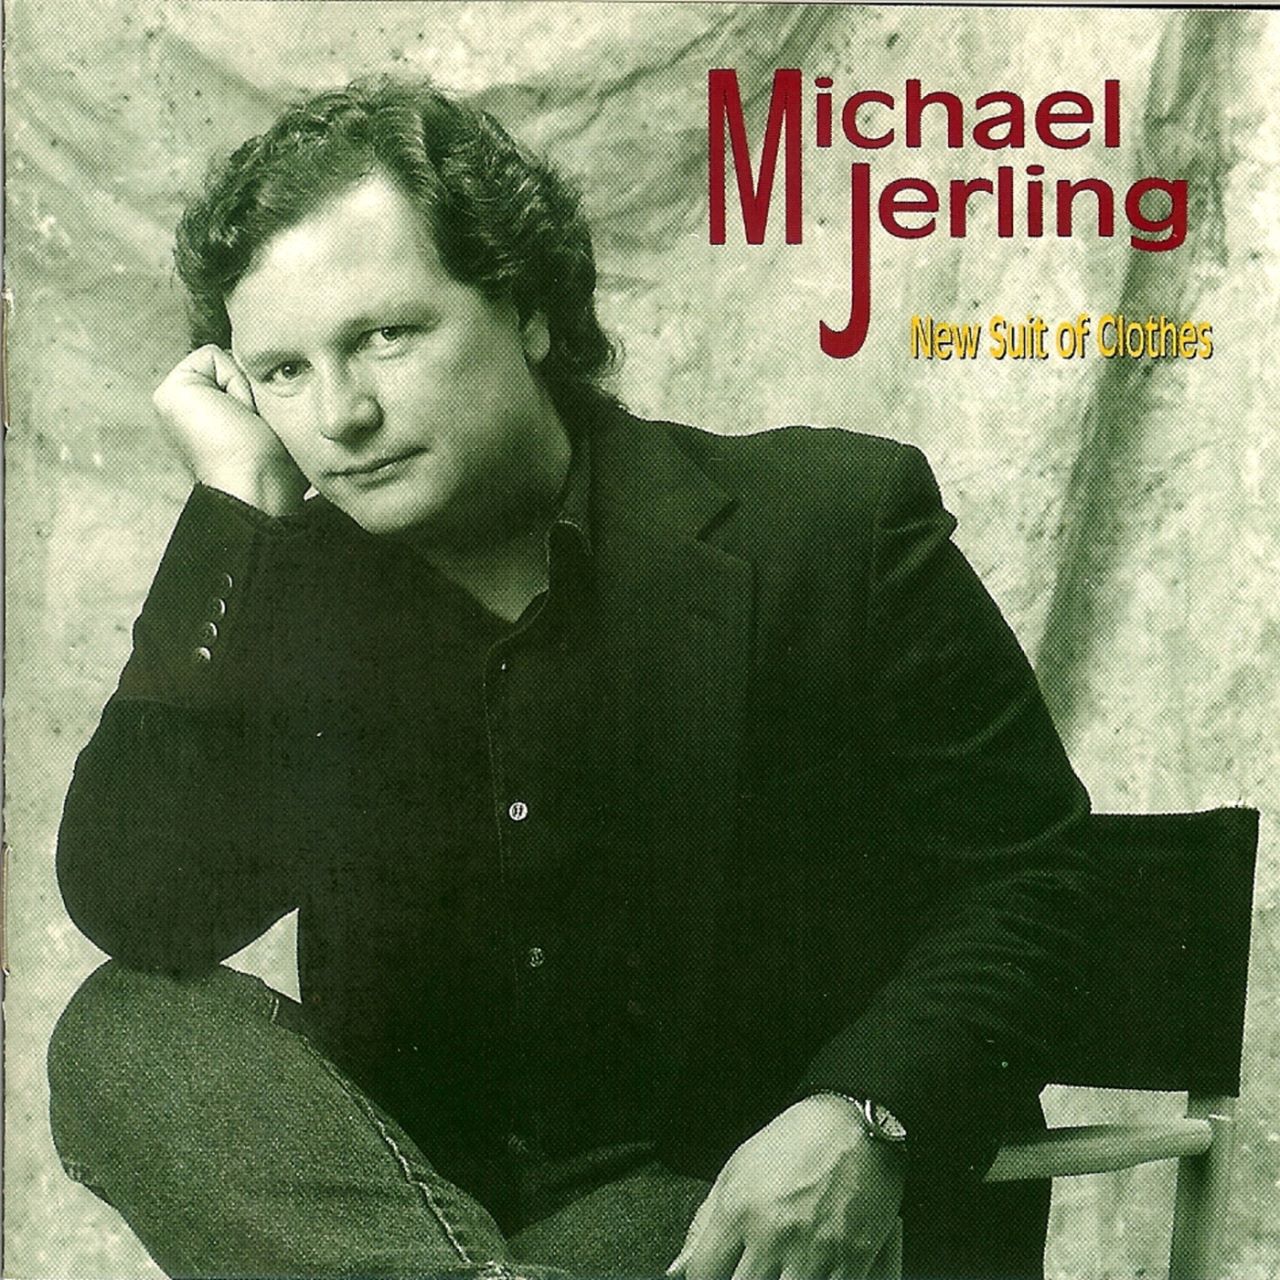 Michael Jerling - New Suit Of Clothes cover album